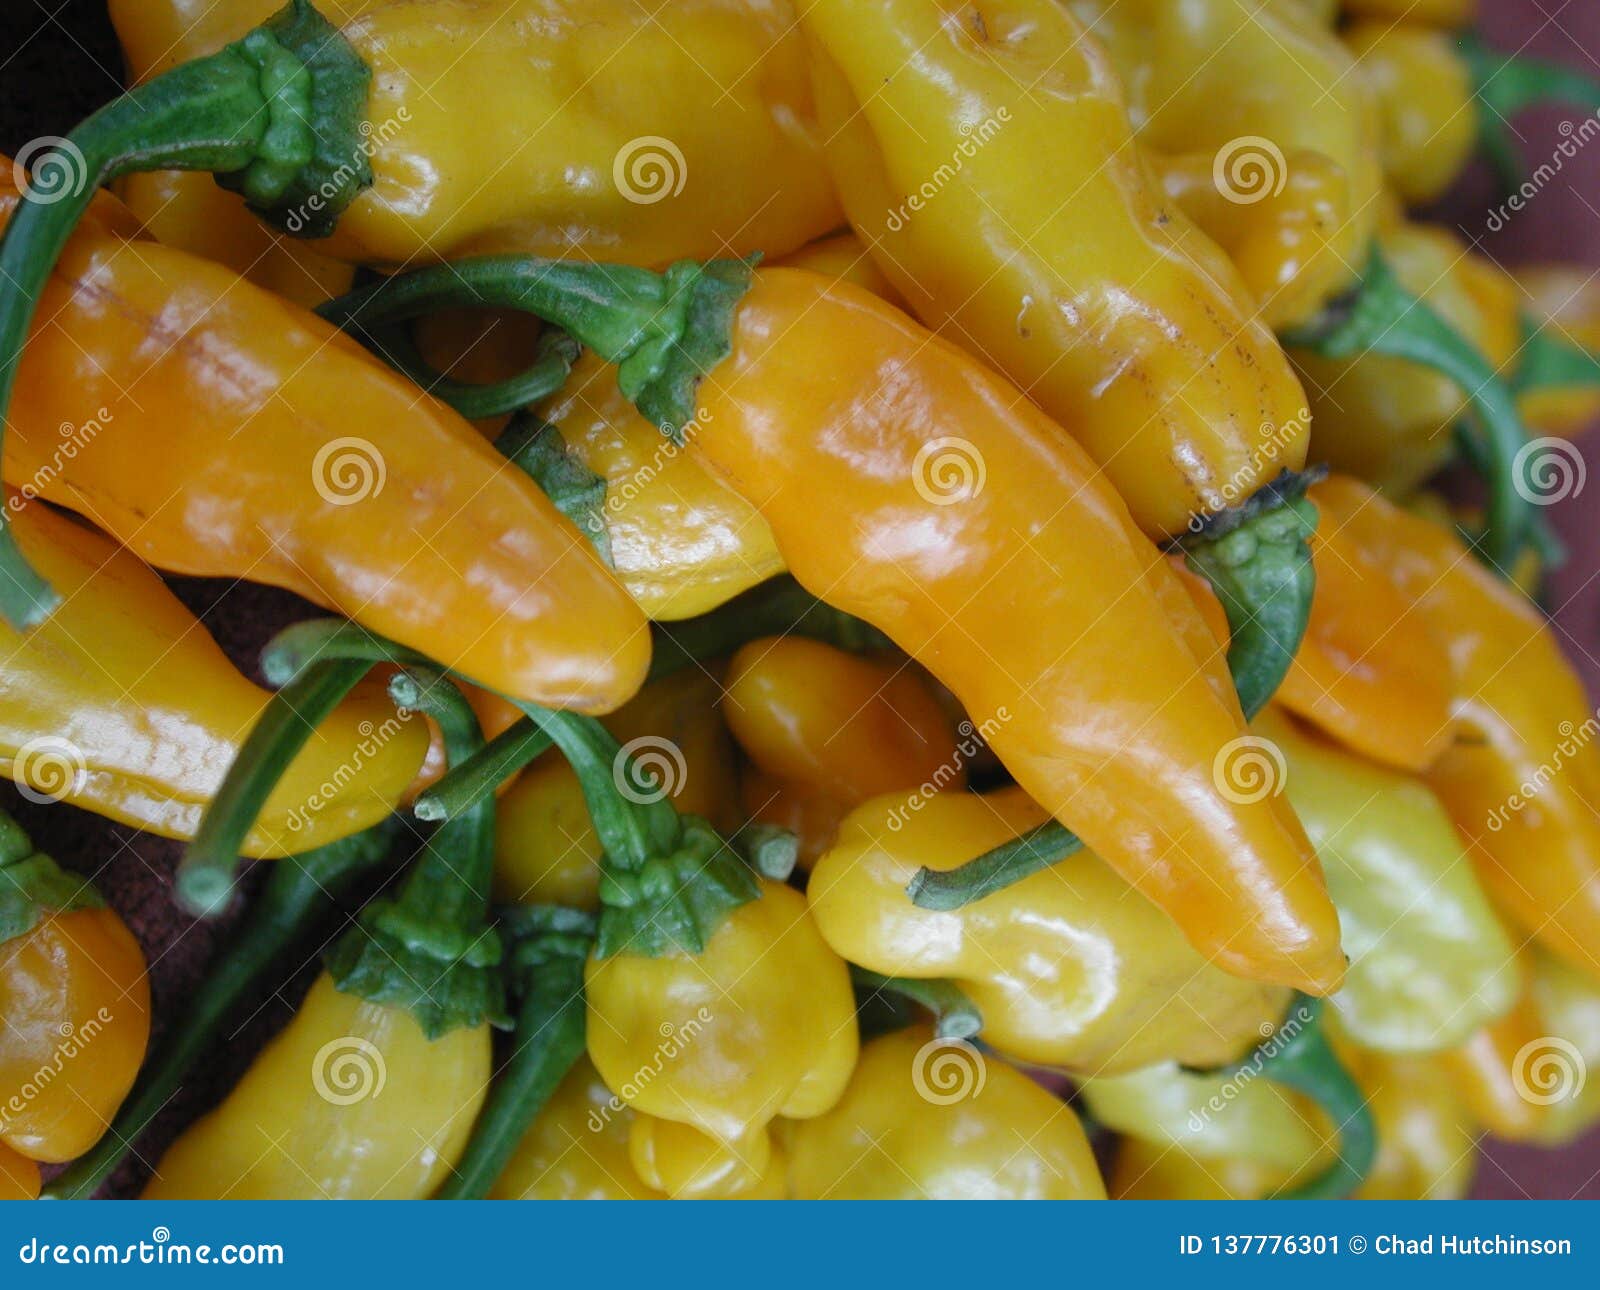 ripe, yellow datil peppers in a pile